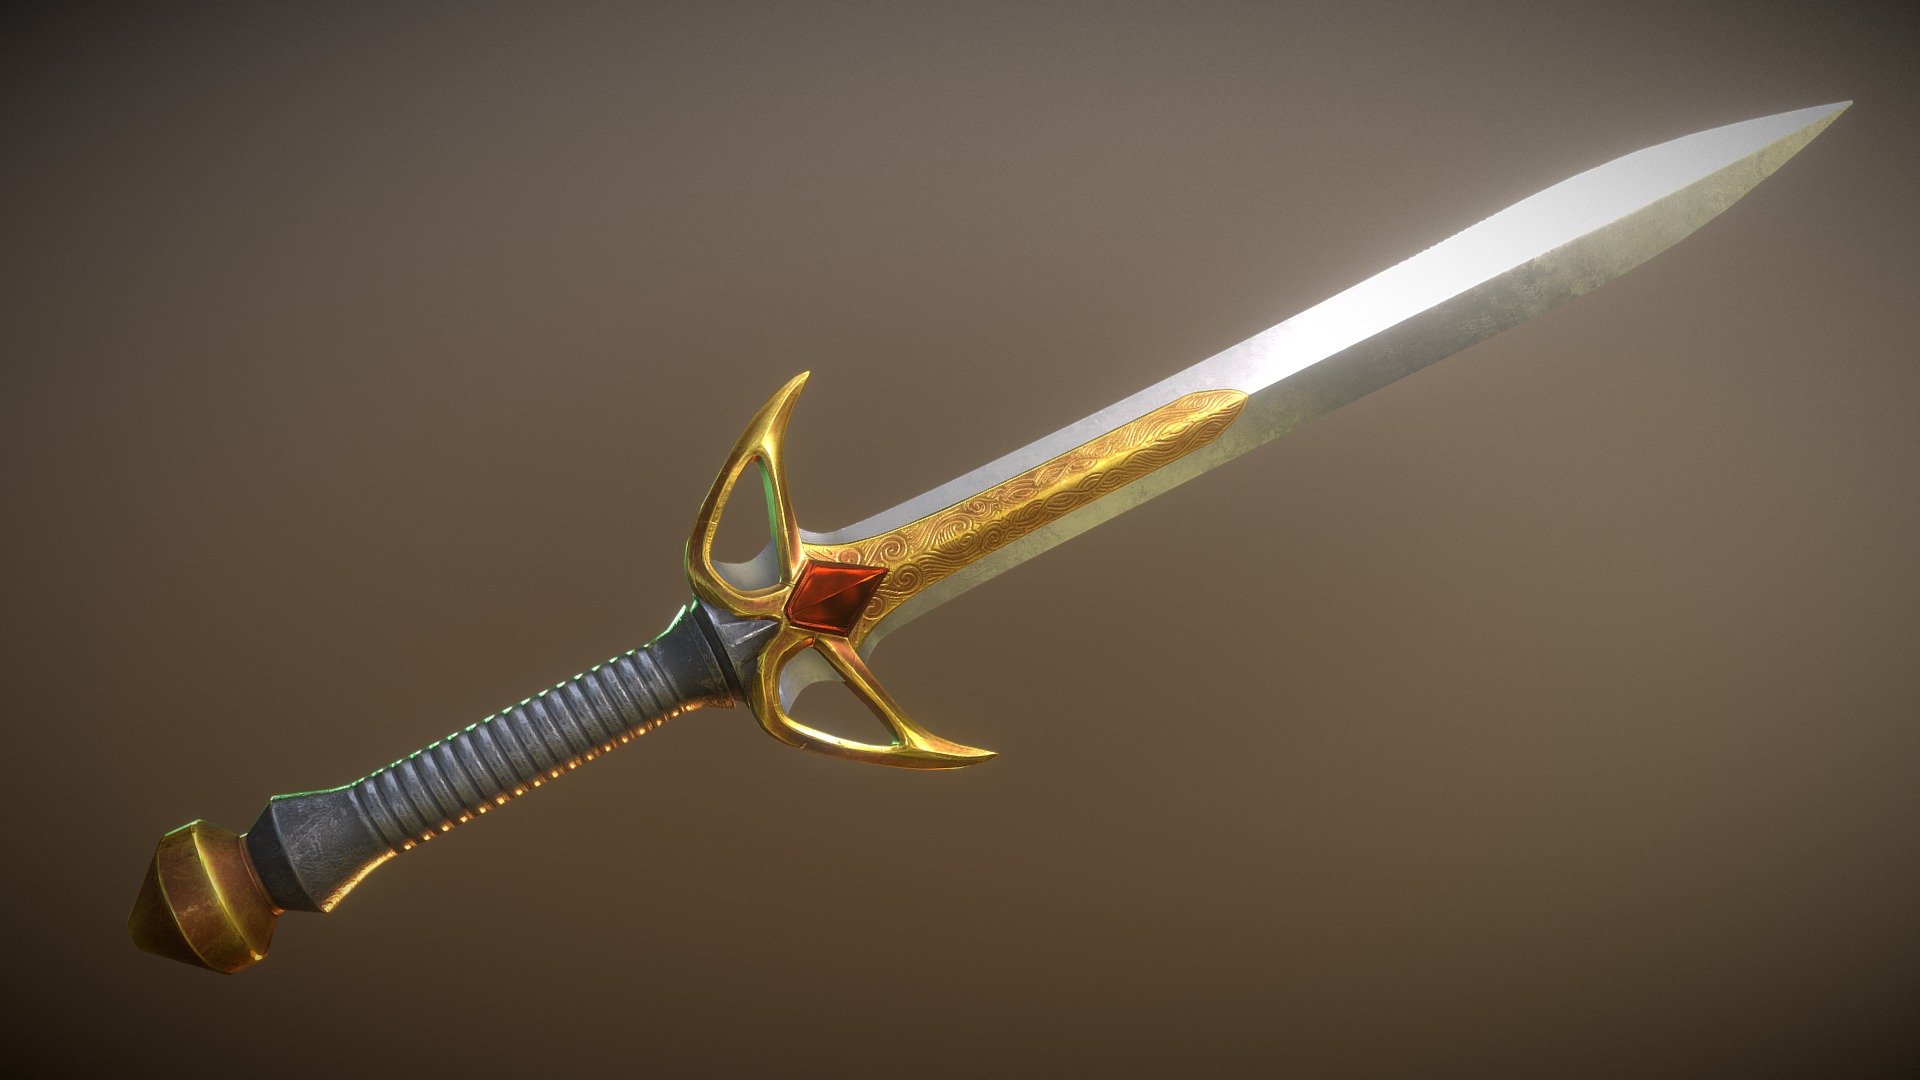 Part of an upcoming Fantasy Weapons Pack for Unity3D

Made with Blender / Substance Painter / zBrush - Sorcerer's Blade - Gold - One Handed Sword - 3D model by vegu (@iamvegu) 3d model